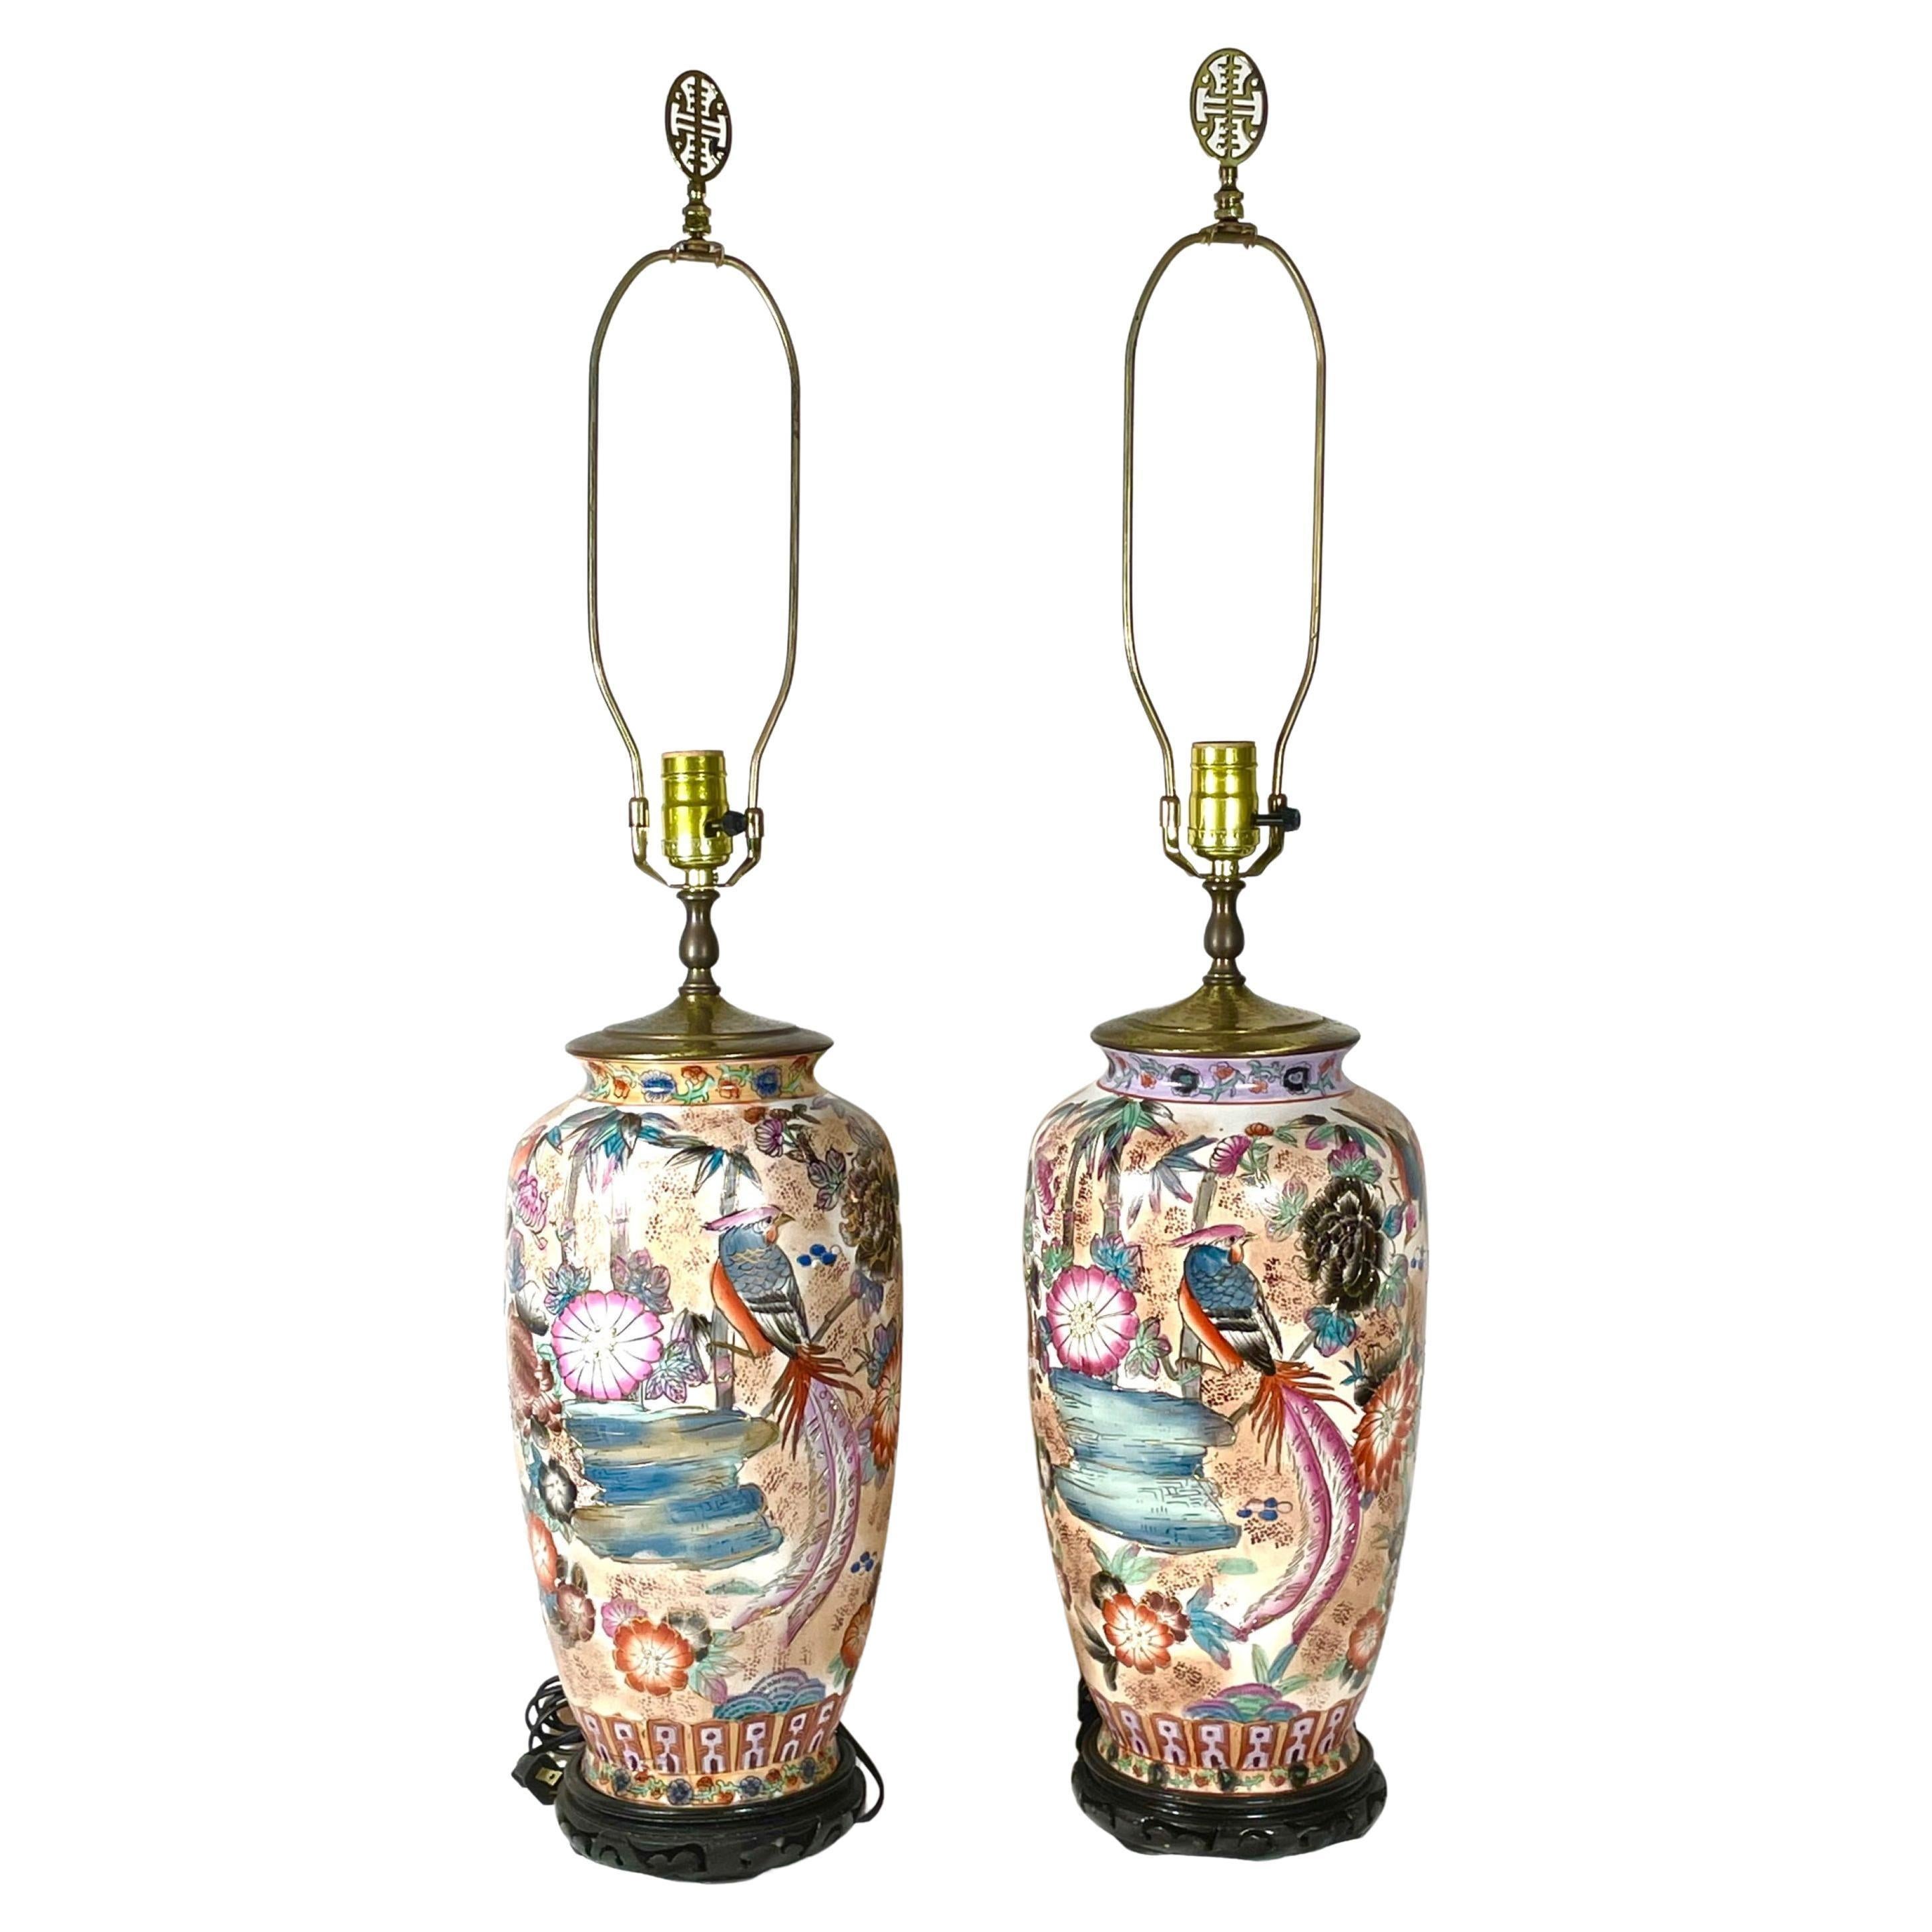 Pair Chinese hand painted porcelain and gilt decorated pheonix motif lamps.

Two large, heavy polychrome Chinese vases with auspicious decorations of Phoenixes encircling peonies among water and branches on a white background. The Ornately